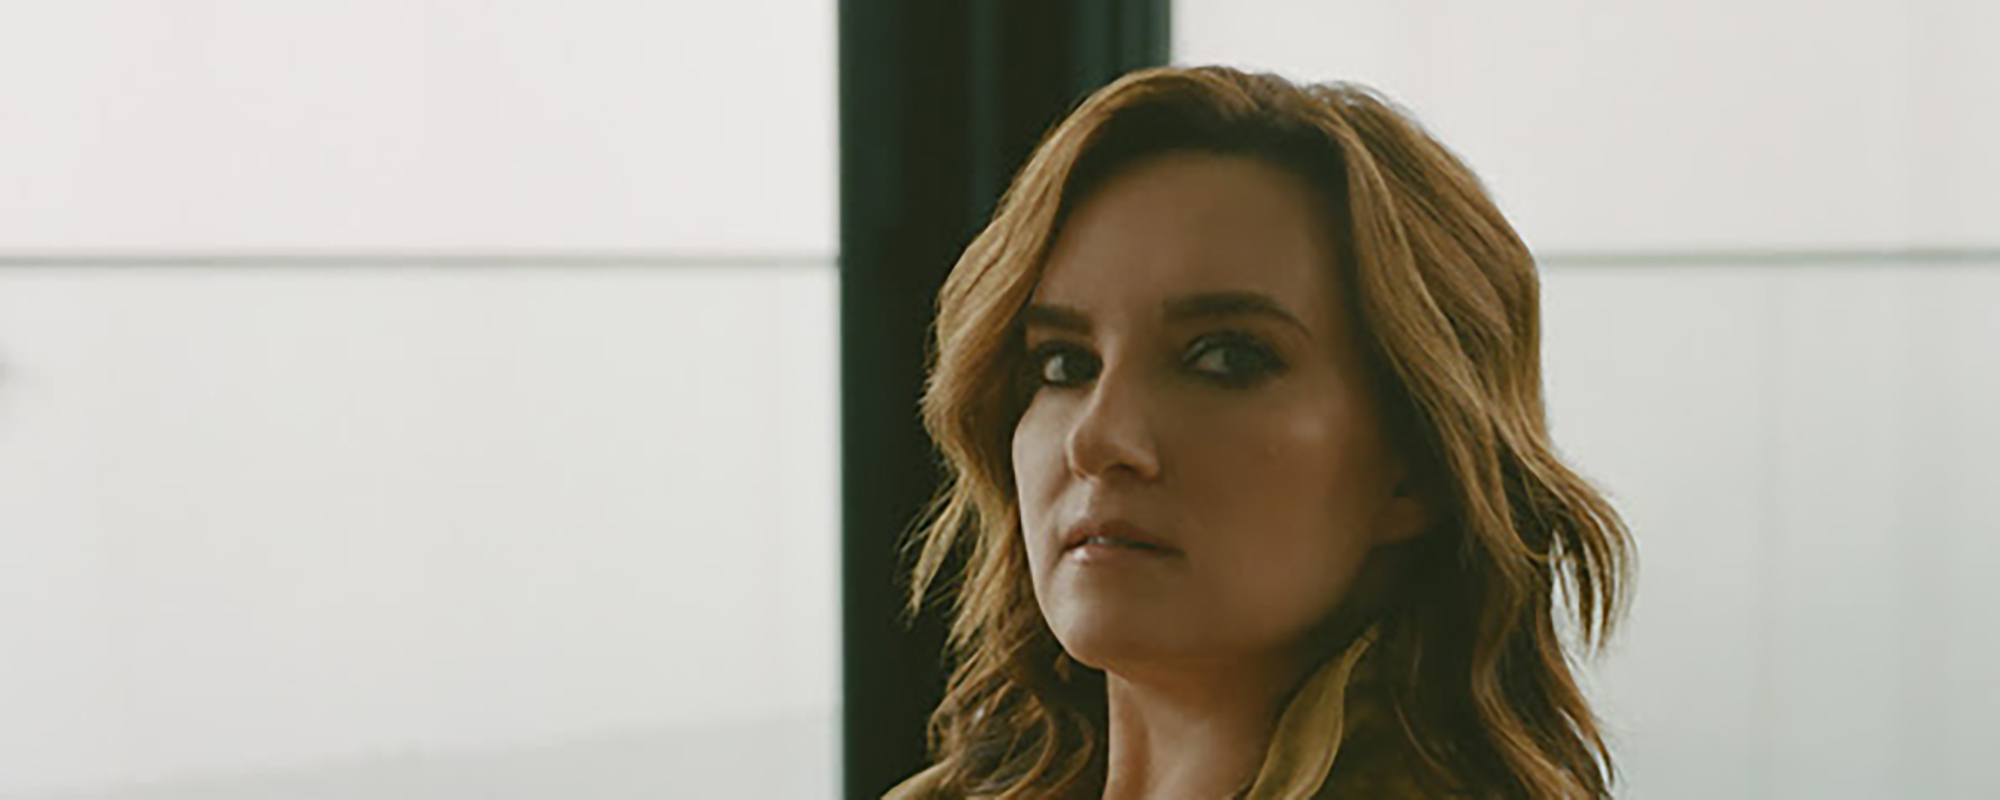 Brandy Clark on Recording Keith Urban’s “Come Back to Me”: “I Love What It Says”